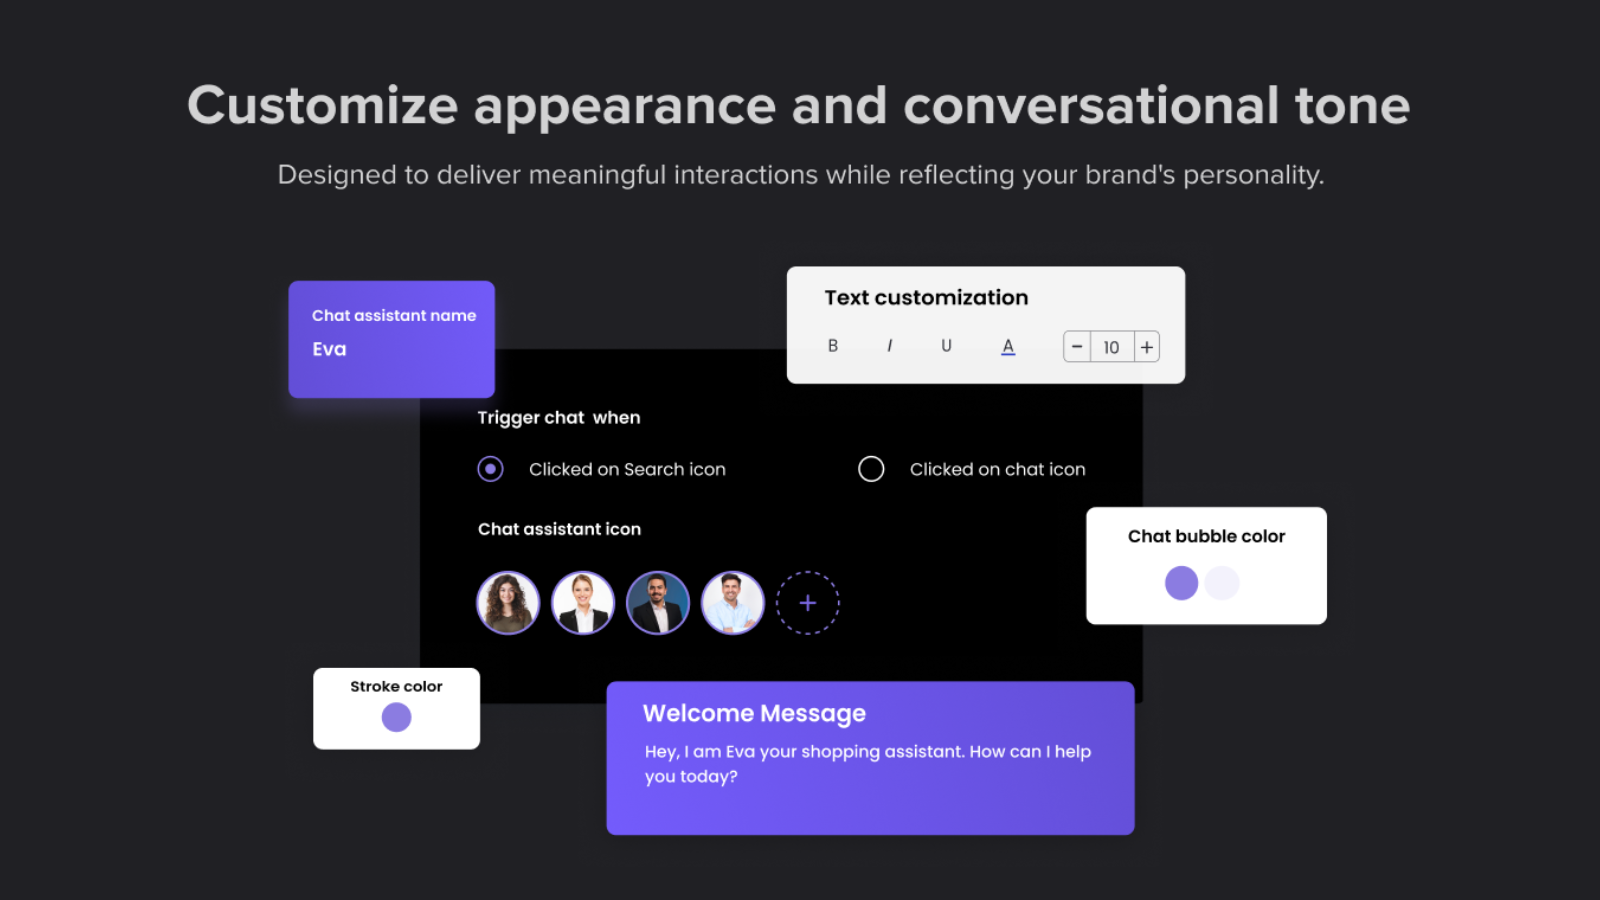 ia conversationnelle, support client ia, personnalisation, chat ia